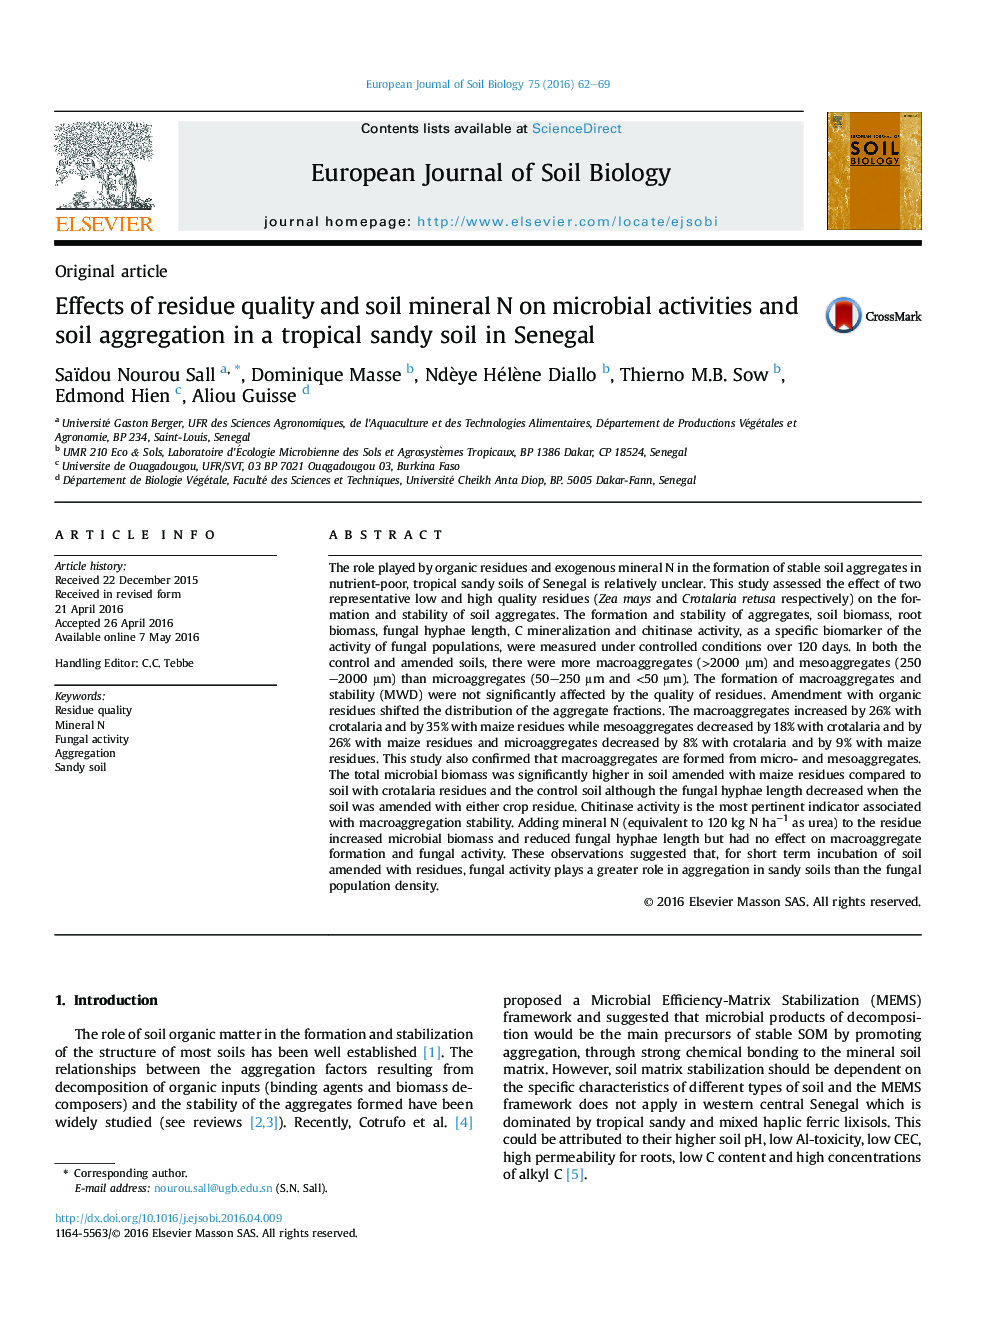 Effects of residue quality and soil mineral N on microbial activities and soil aggregation in a tropical sandy soil in Senegal